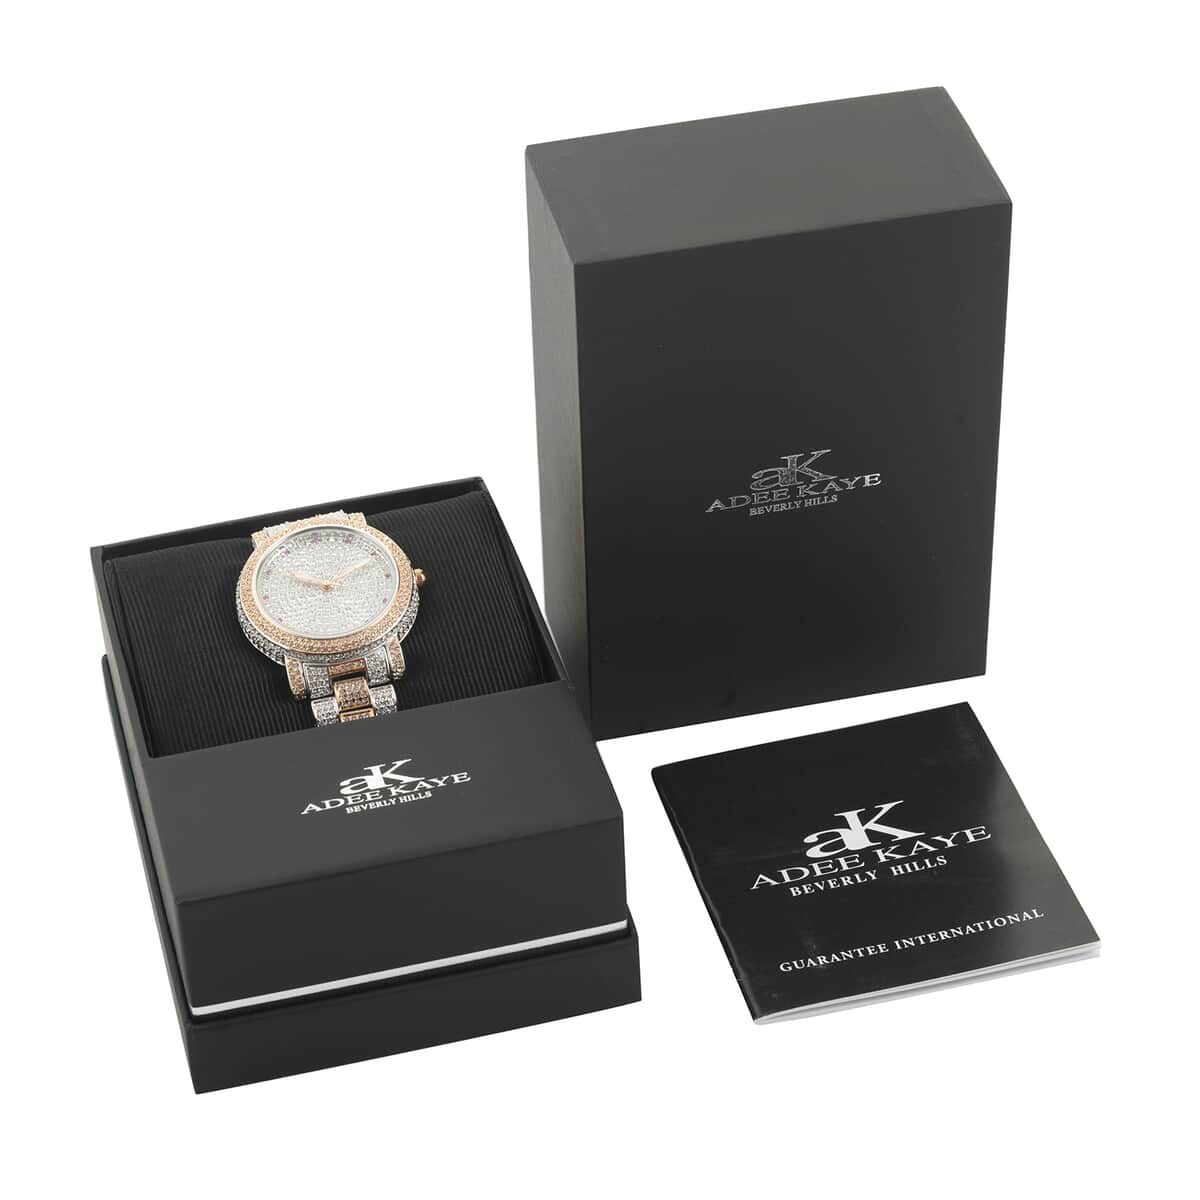 ADEE KAYE Austrian Crystal Japan Quartz Movement Watch in ION Plated RG and Stainless Steel Strap (39 mm) image number 6